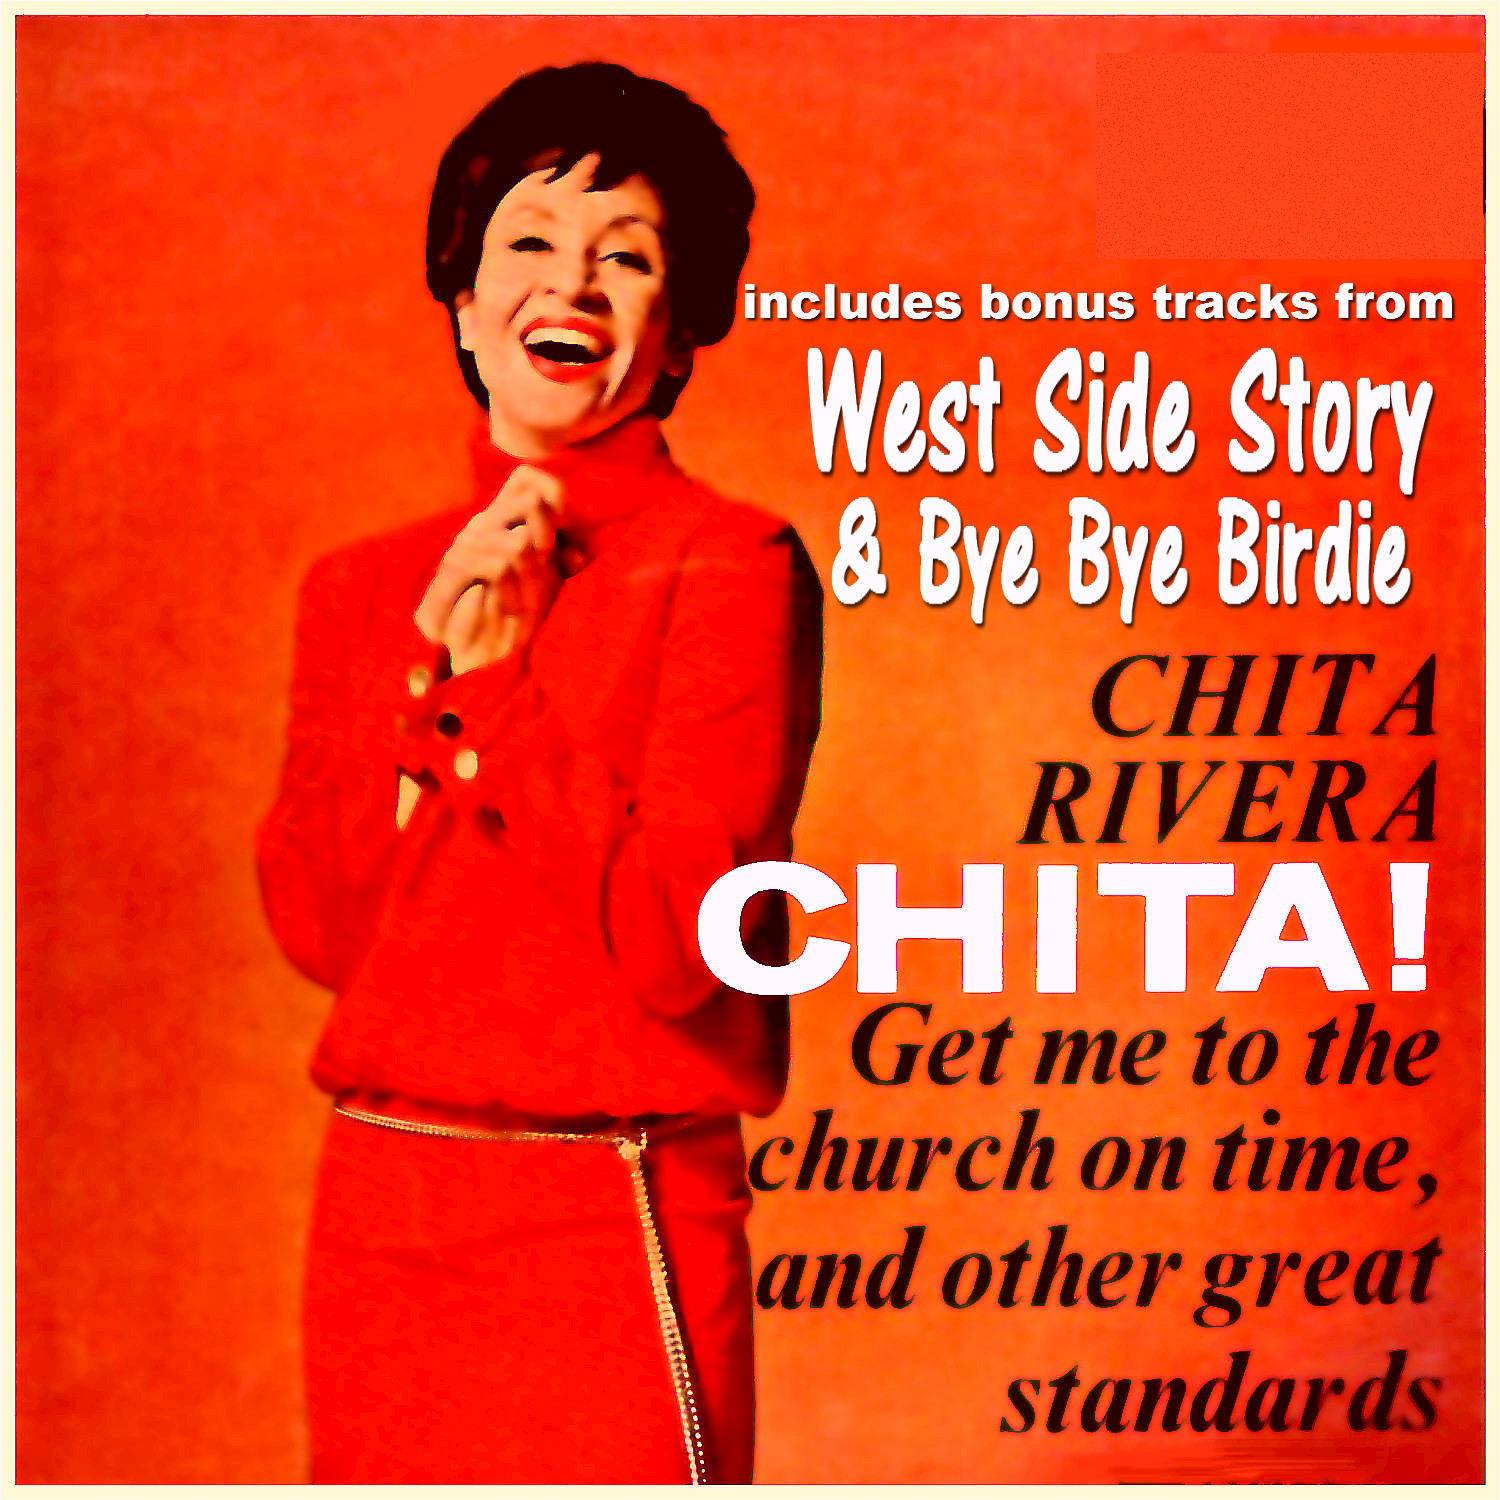 Chita! Get Me to the Church on Time